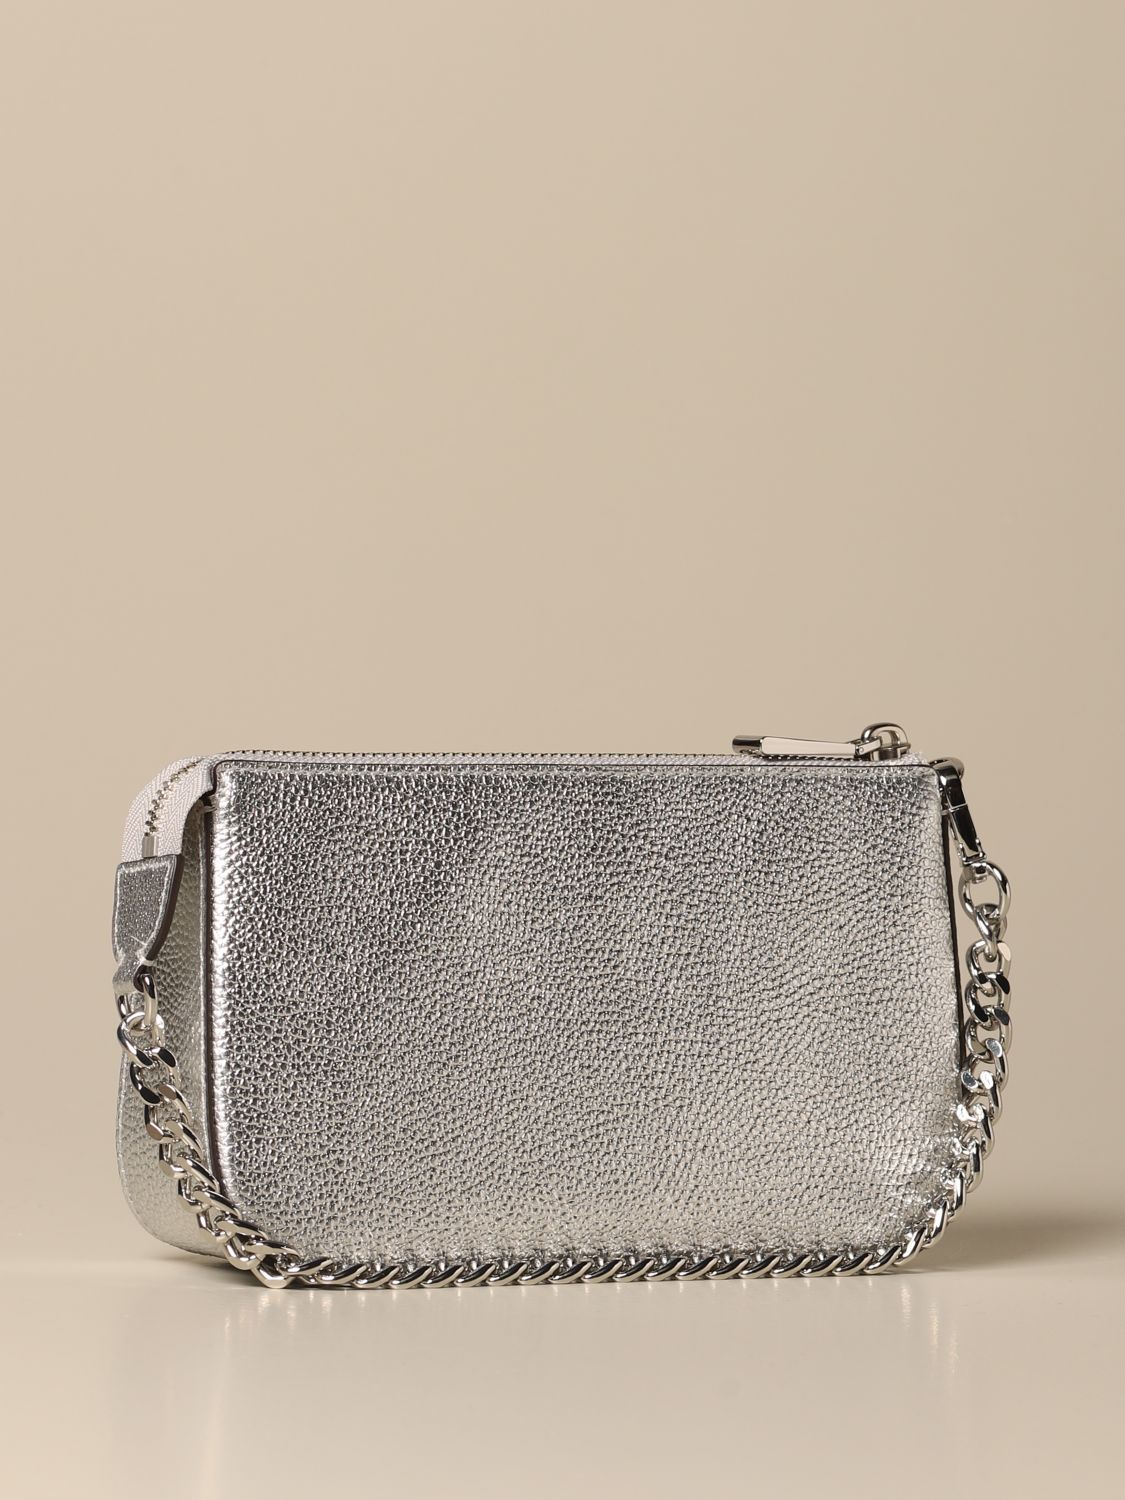 Leather bag charm Michael Kors Grey in Leather - 26614684